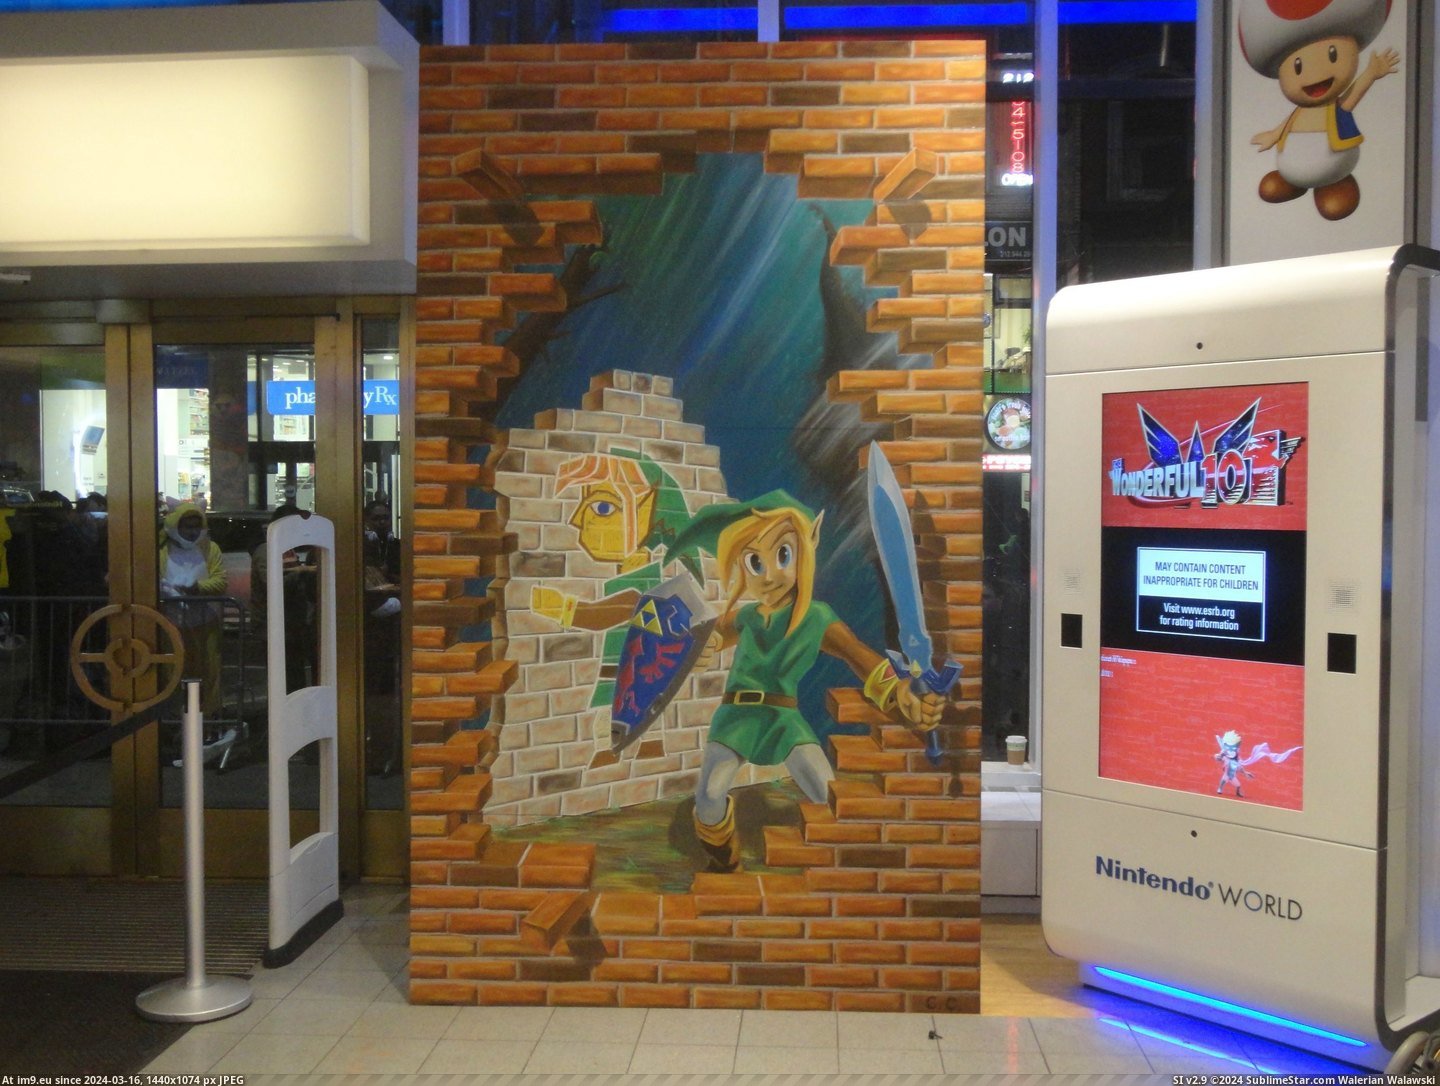 #Gaming #For #World #Drawing #Release #Event #Chalk #Night #Zelda #Nintendo [Gaming] I made this chalk drawing at Nintendo World for the Zelda release event last night Pic. (Изображение из альбом My r/GAMING favs))